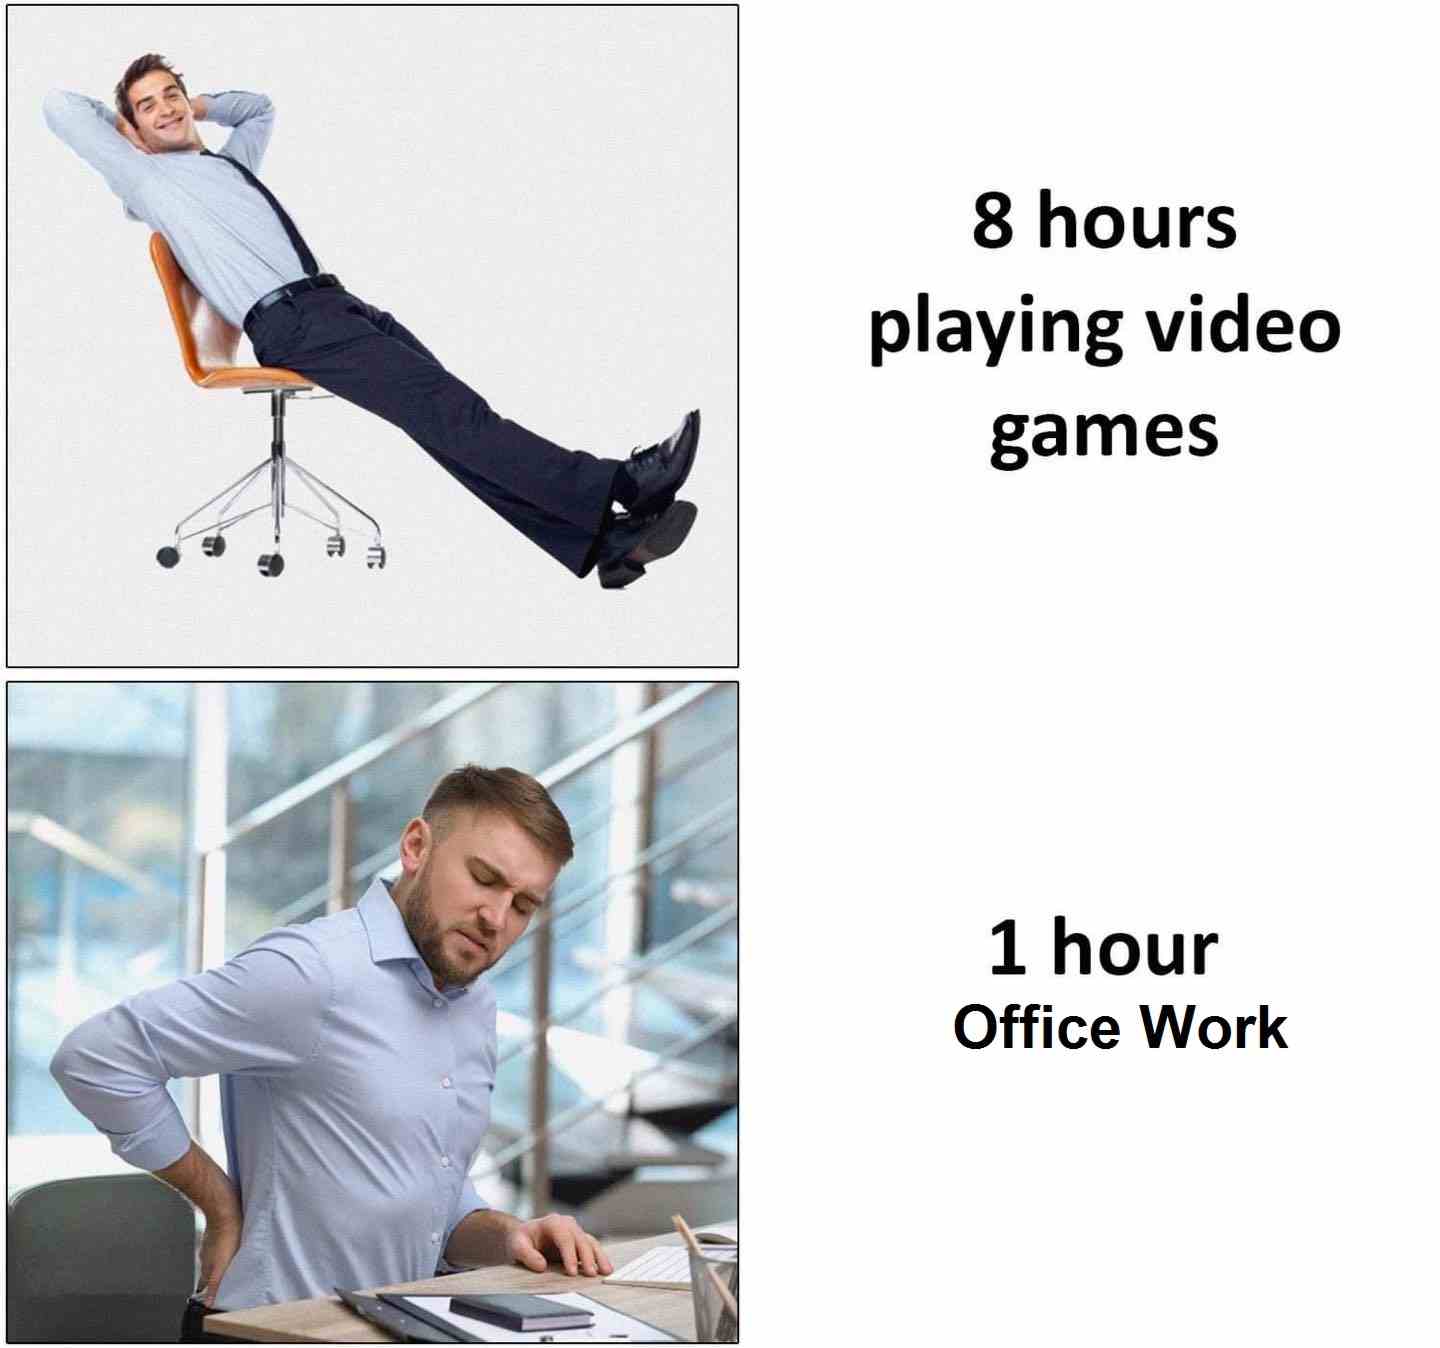 Programmer 8hours playing video games vs 1hour office work